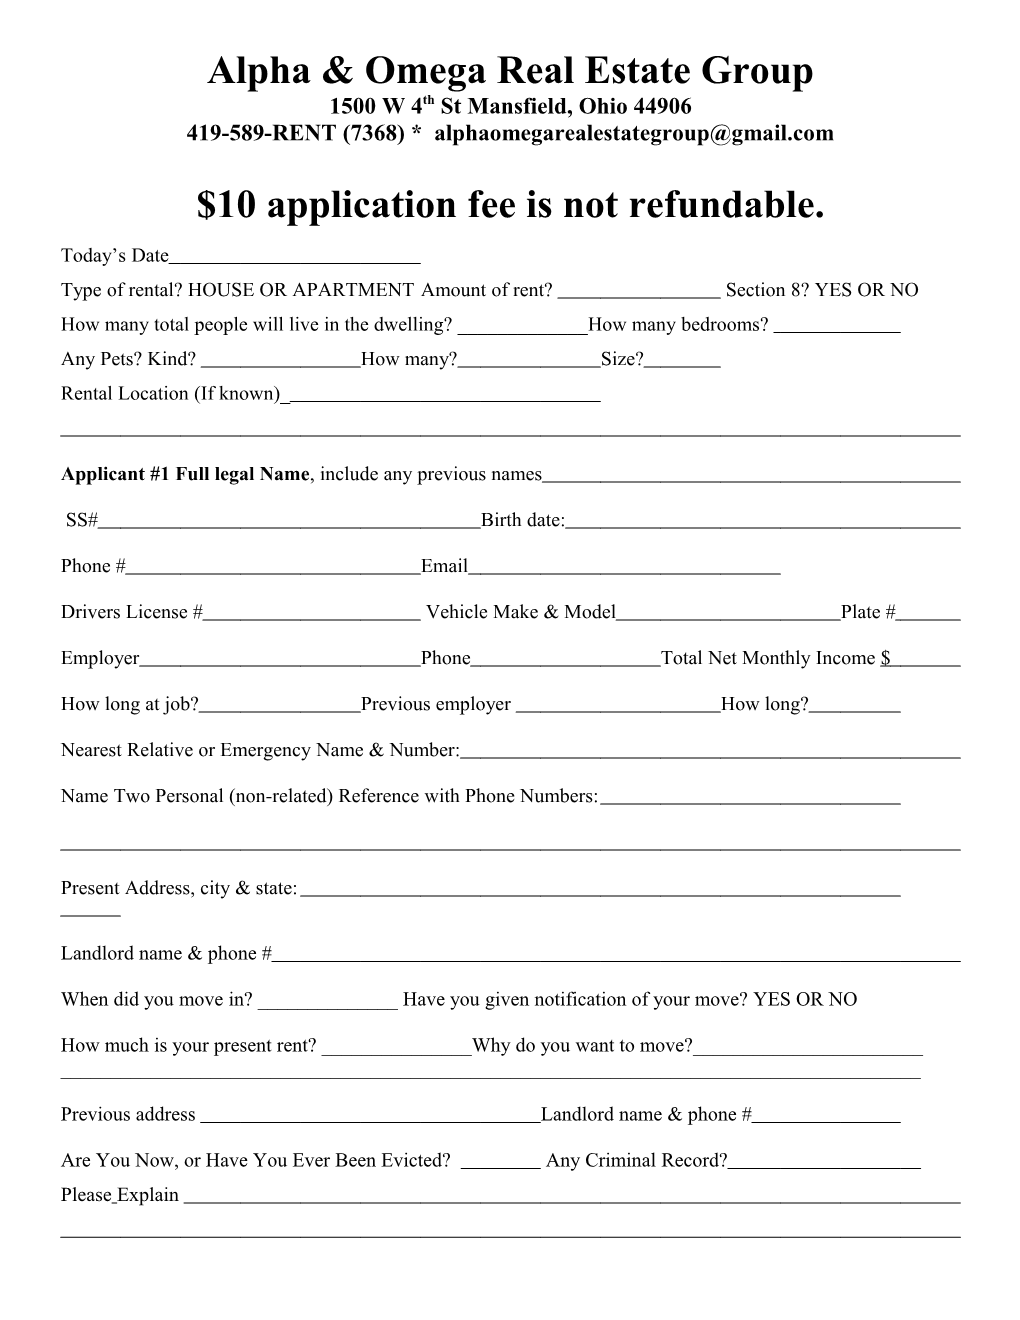 $10 Application Fee Is Not Refundable